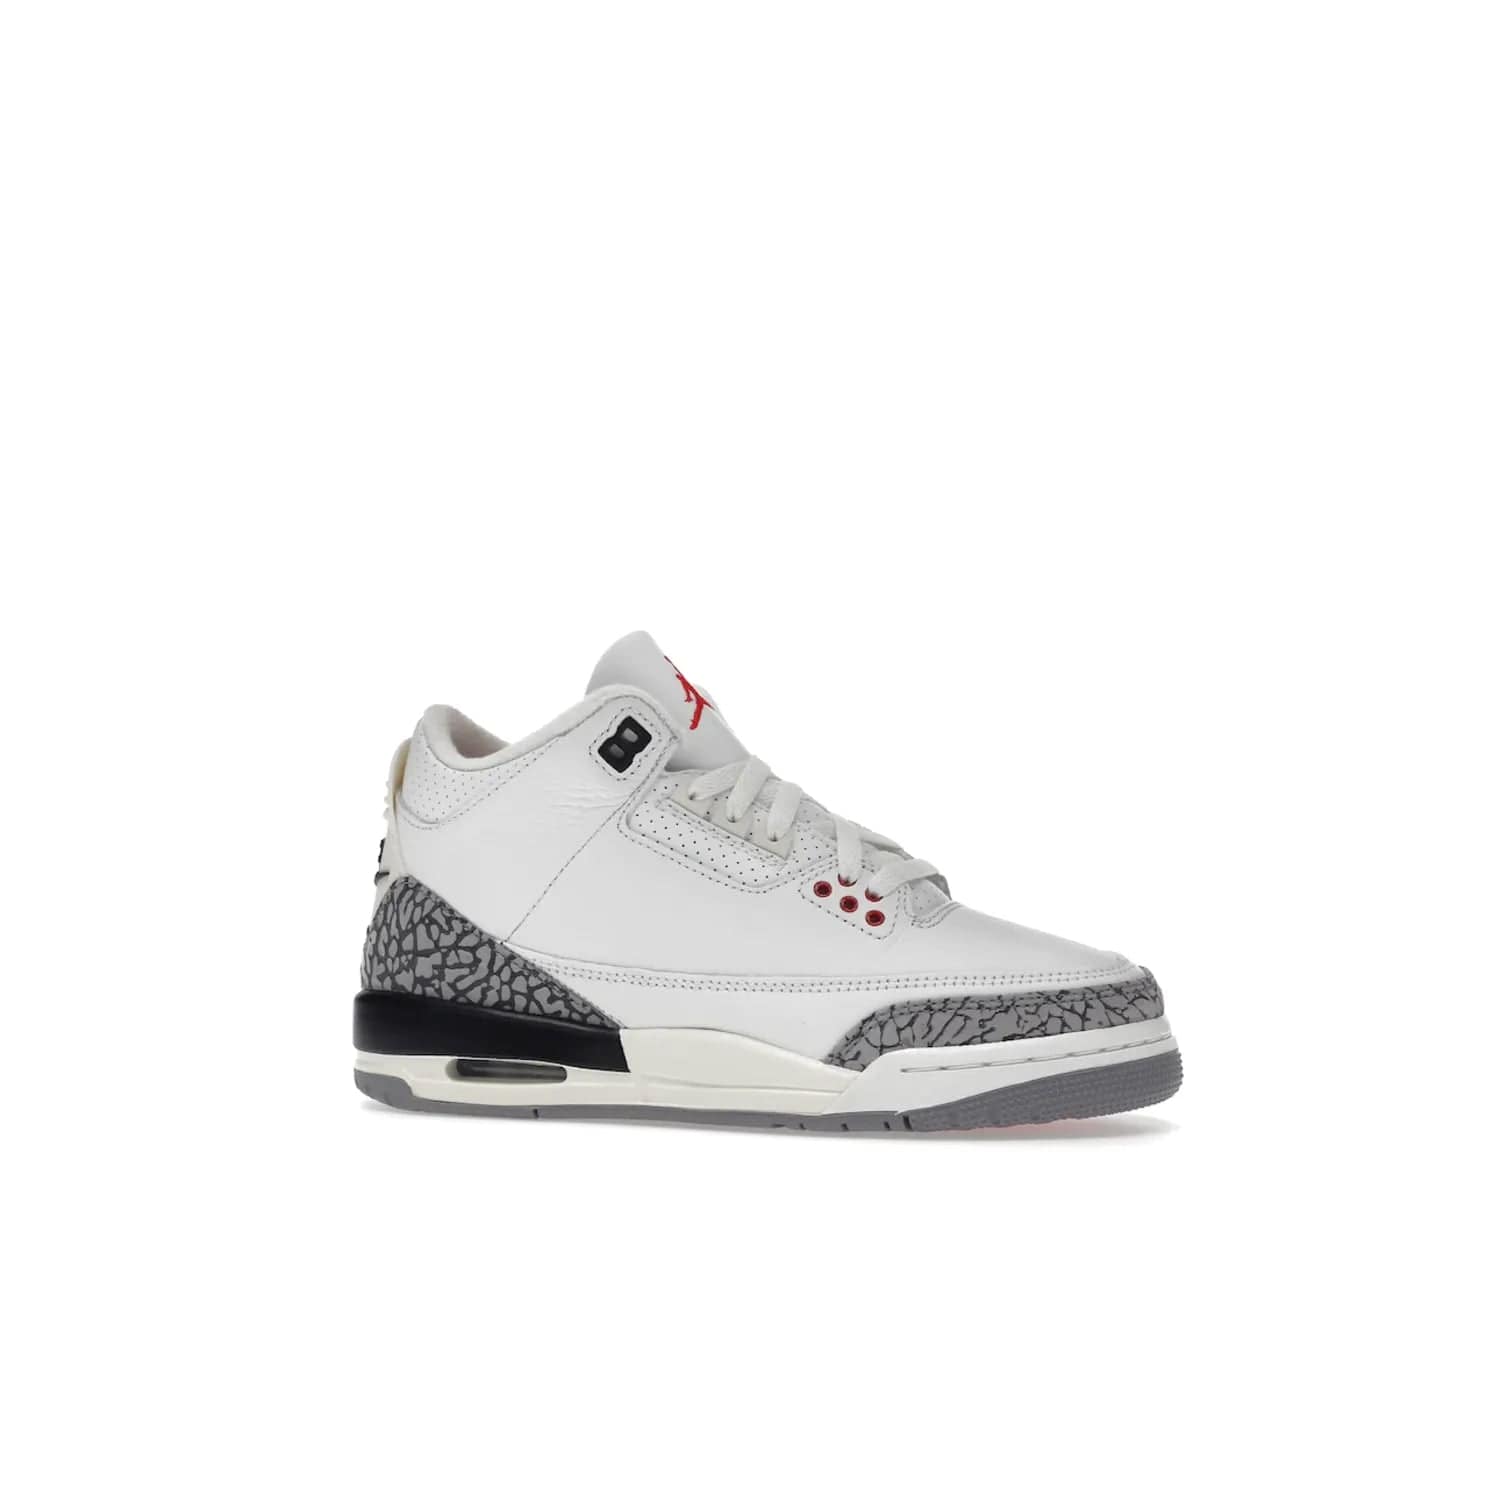 Jordan 3 Retro White Cement Reimagined (GS) - Image 3 - Only at www.BallersClubKickz.com - Grab the perfect blend of modern design and classic style with the Jordan 3 Retro White Cement Reimagined (GS). Features Summit White, Fire Red, Black, and Cement Grey colorway, iconic Jordan logo embroidered on the tongue, and “Nike Air” branding. Limited availability, get your pair before March 11th 2023.